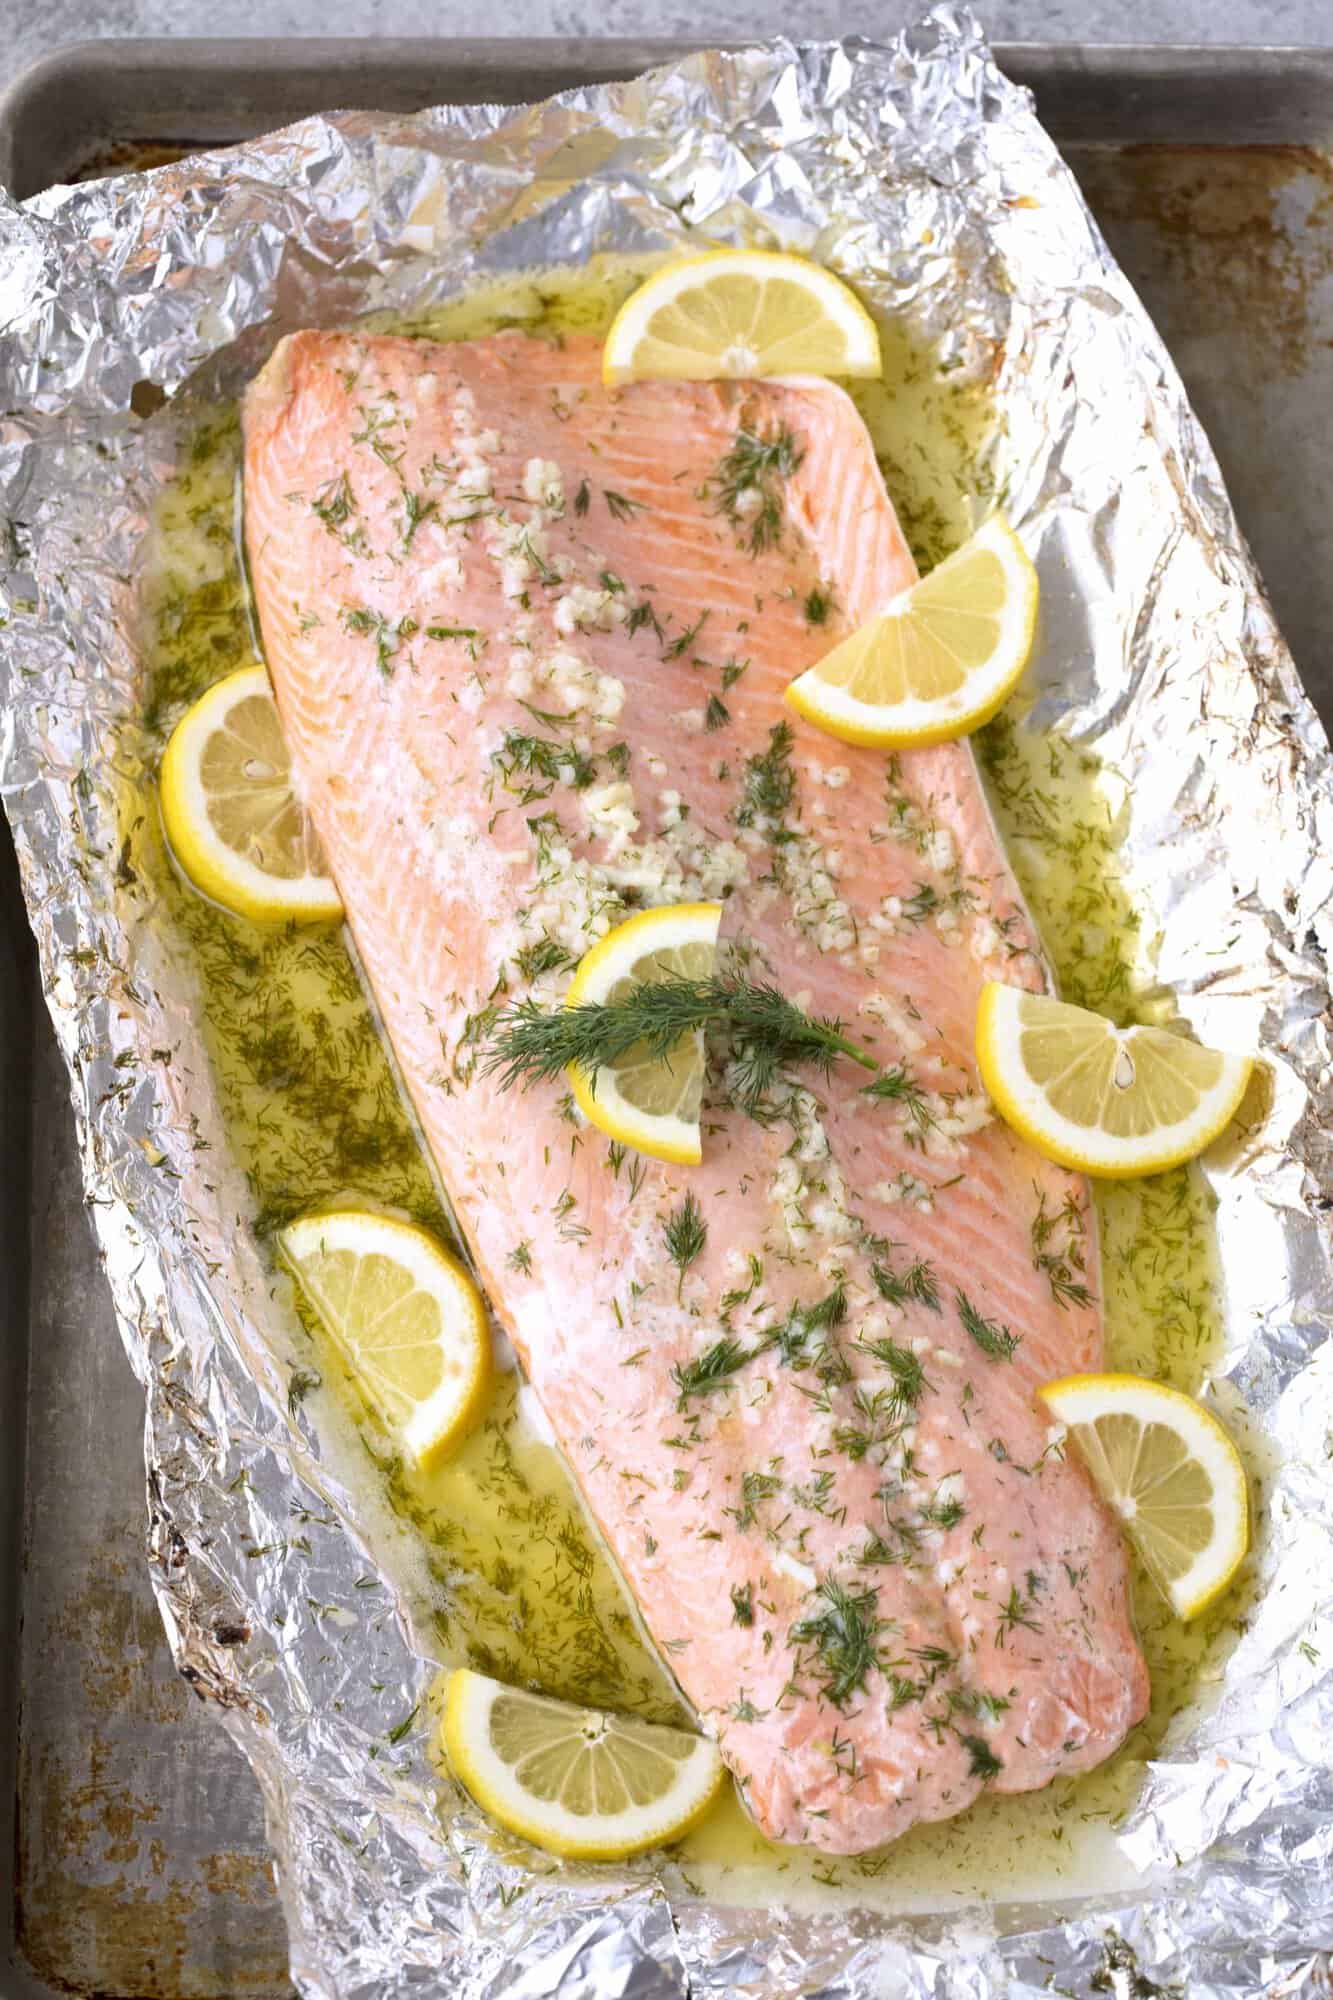 It doesn't get much easier than this Easy 5 Ingredient Baked Salmon with a garlic, lemon, and dill butter sauce. All it takes is 5 ingredients and 20 minutes of your time. So simple, so flavorful!